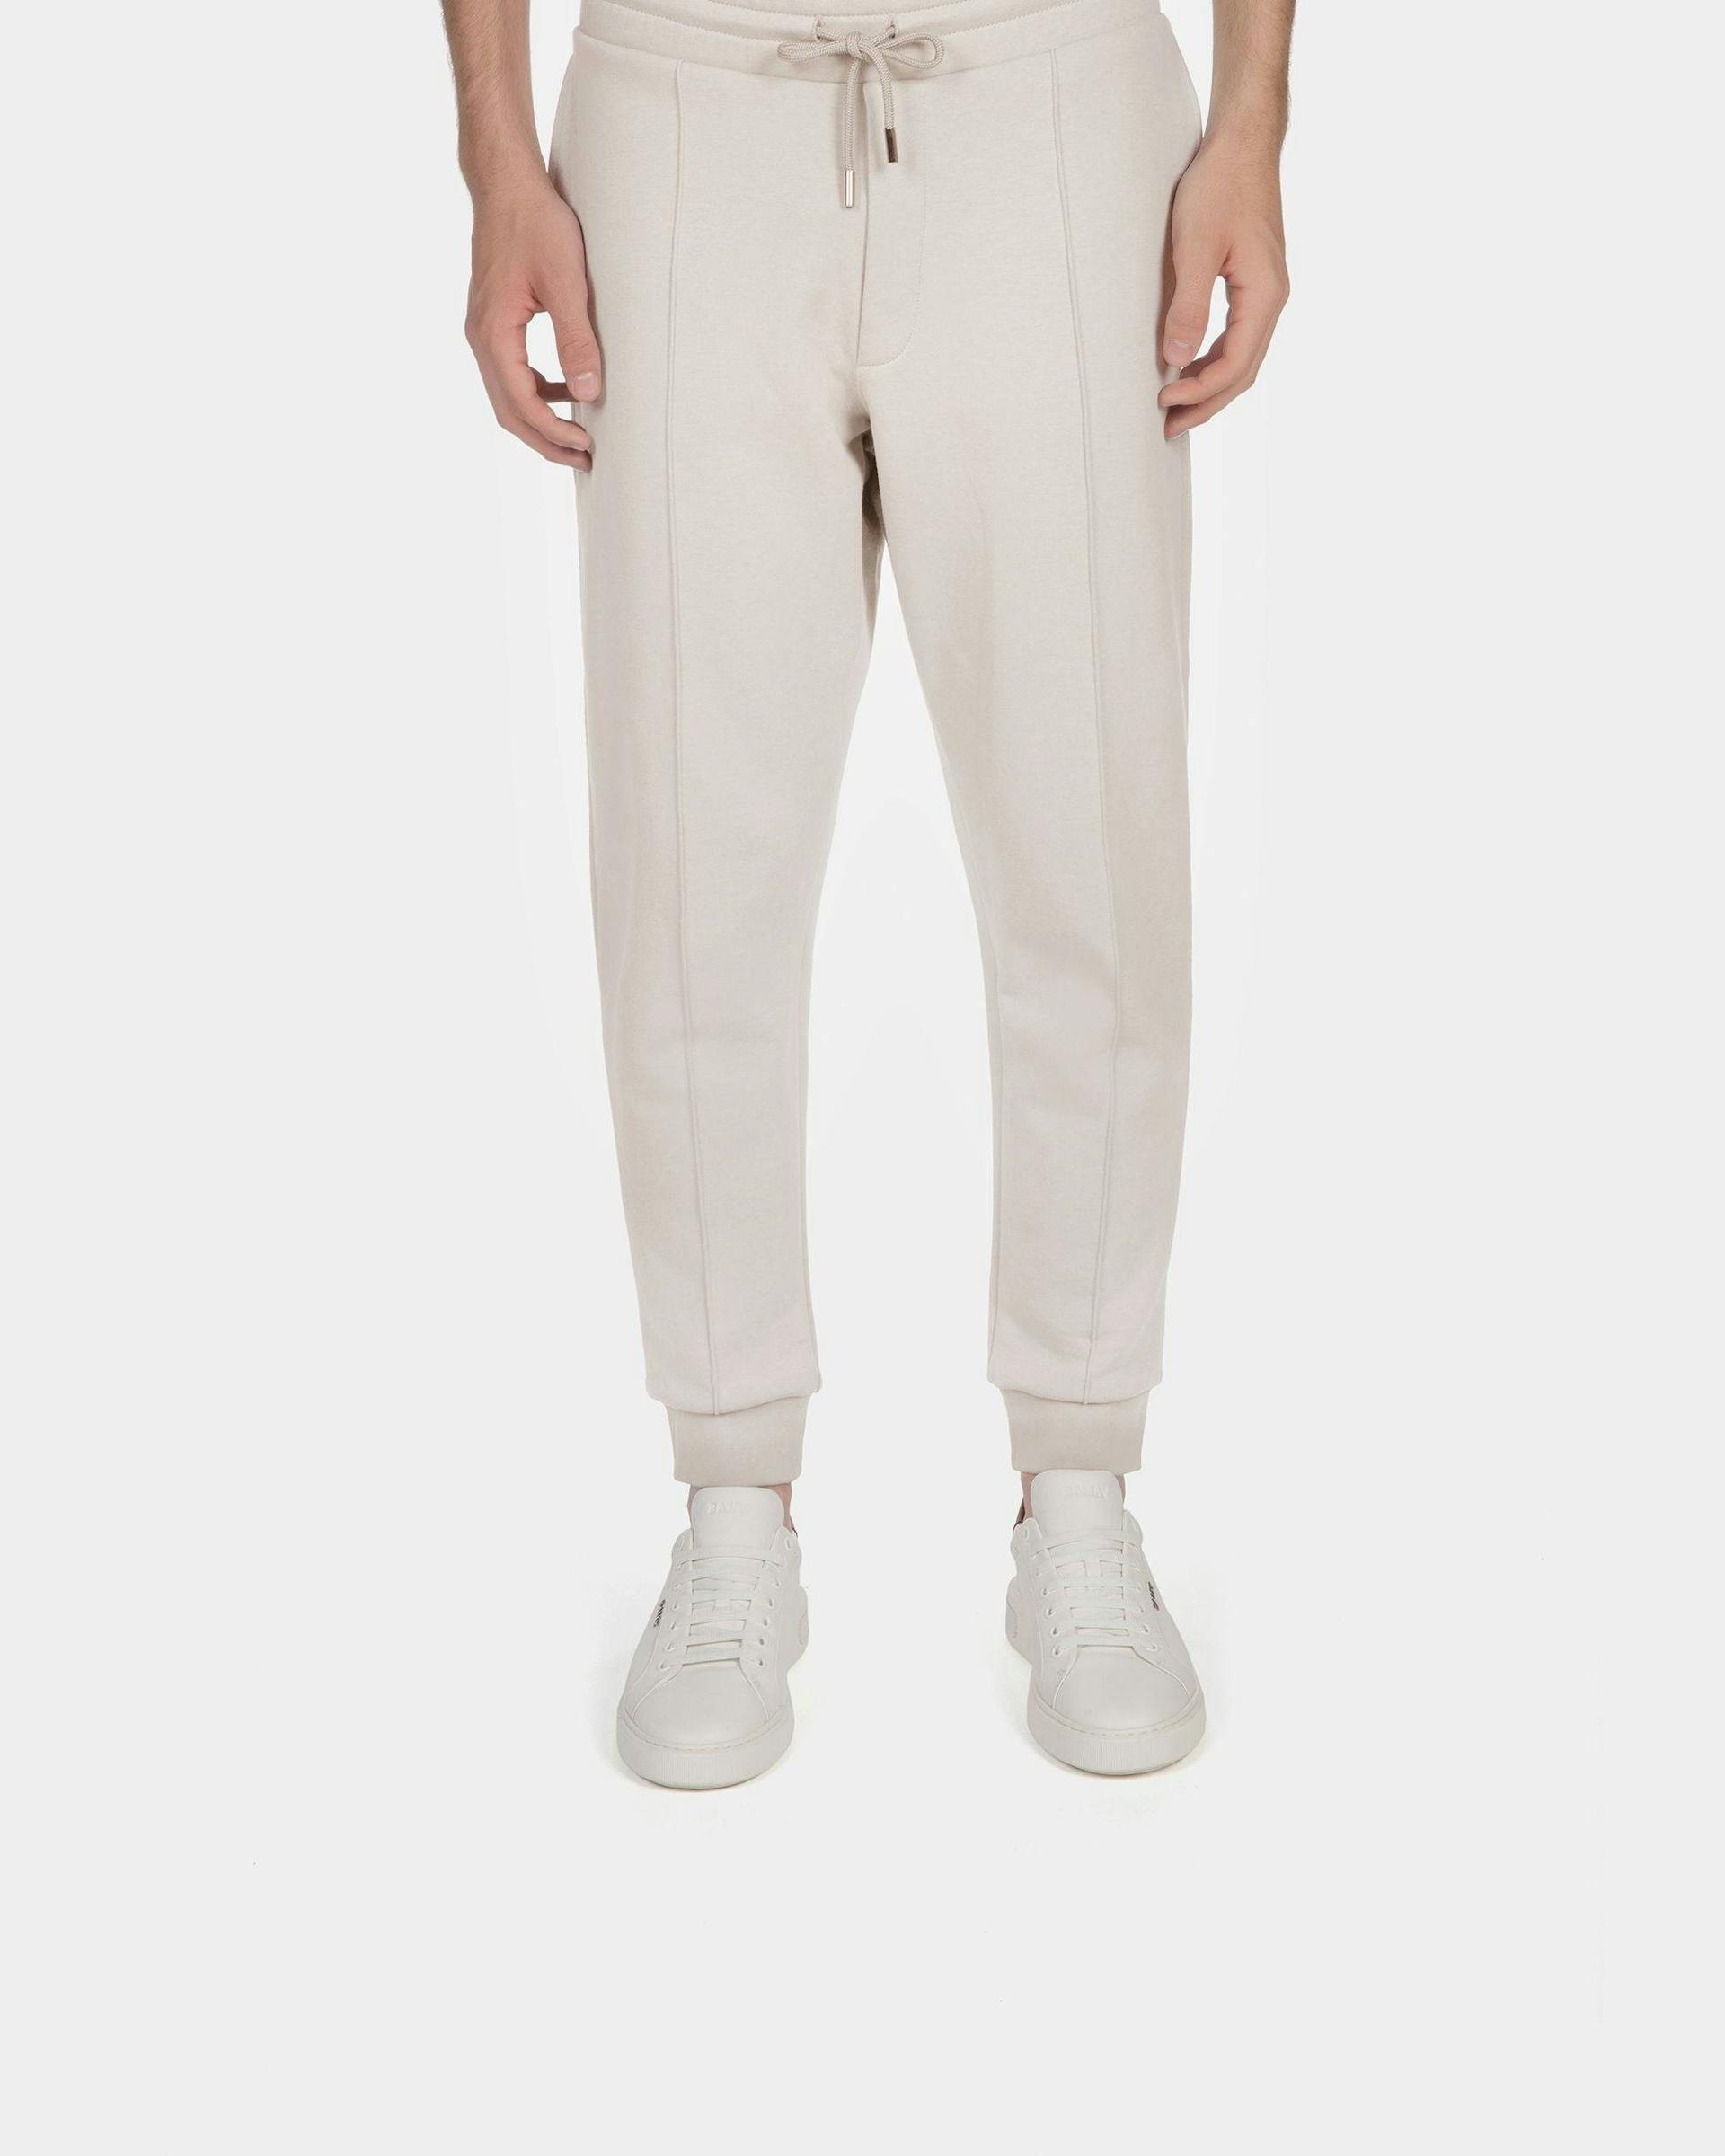 Cotton Sweatpants In Gray And Black - Men's - Bally - 02